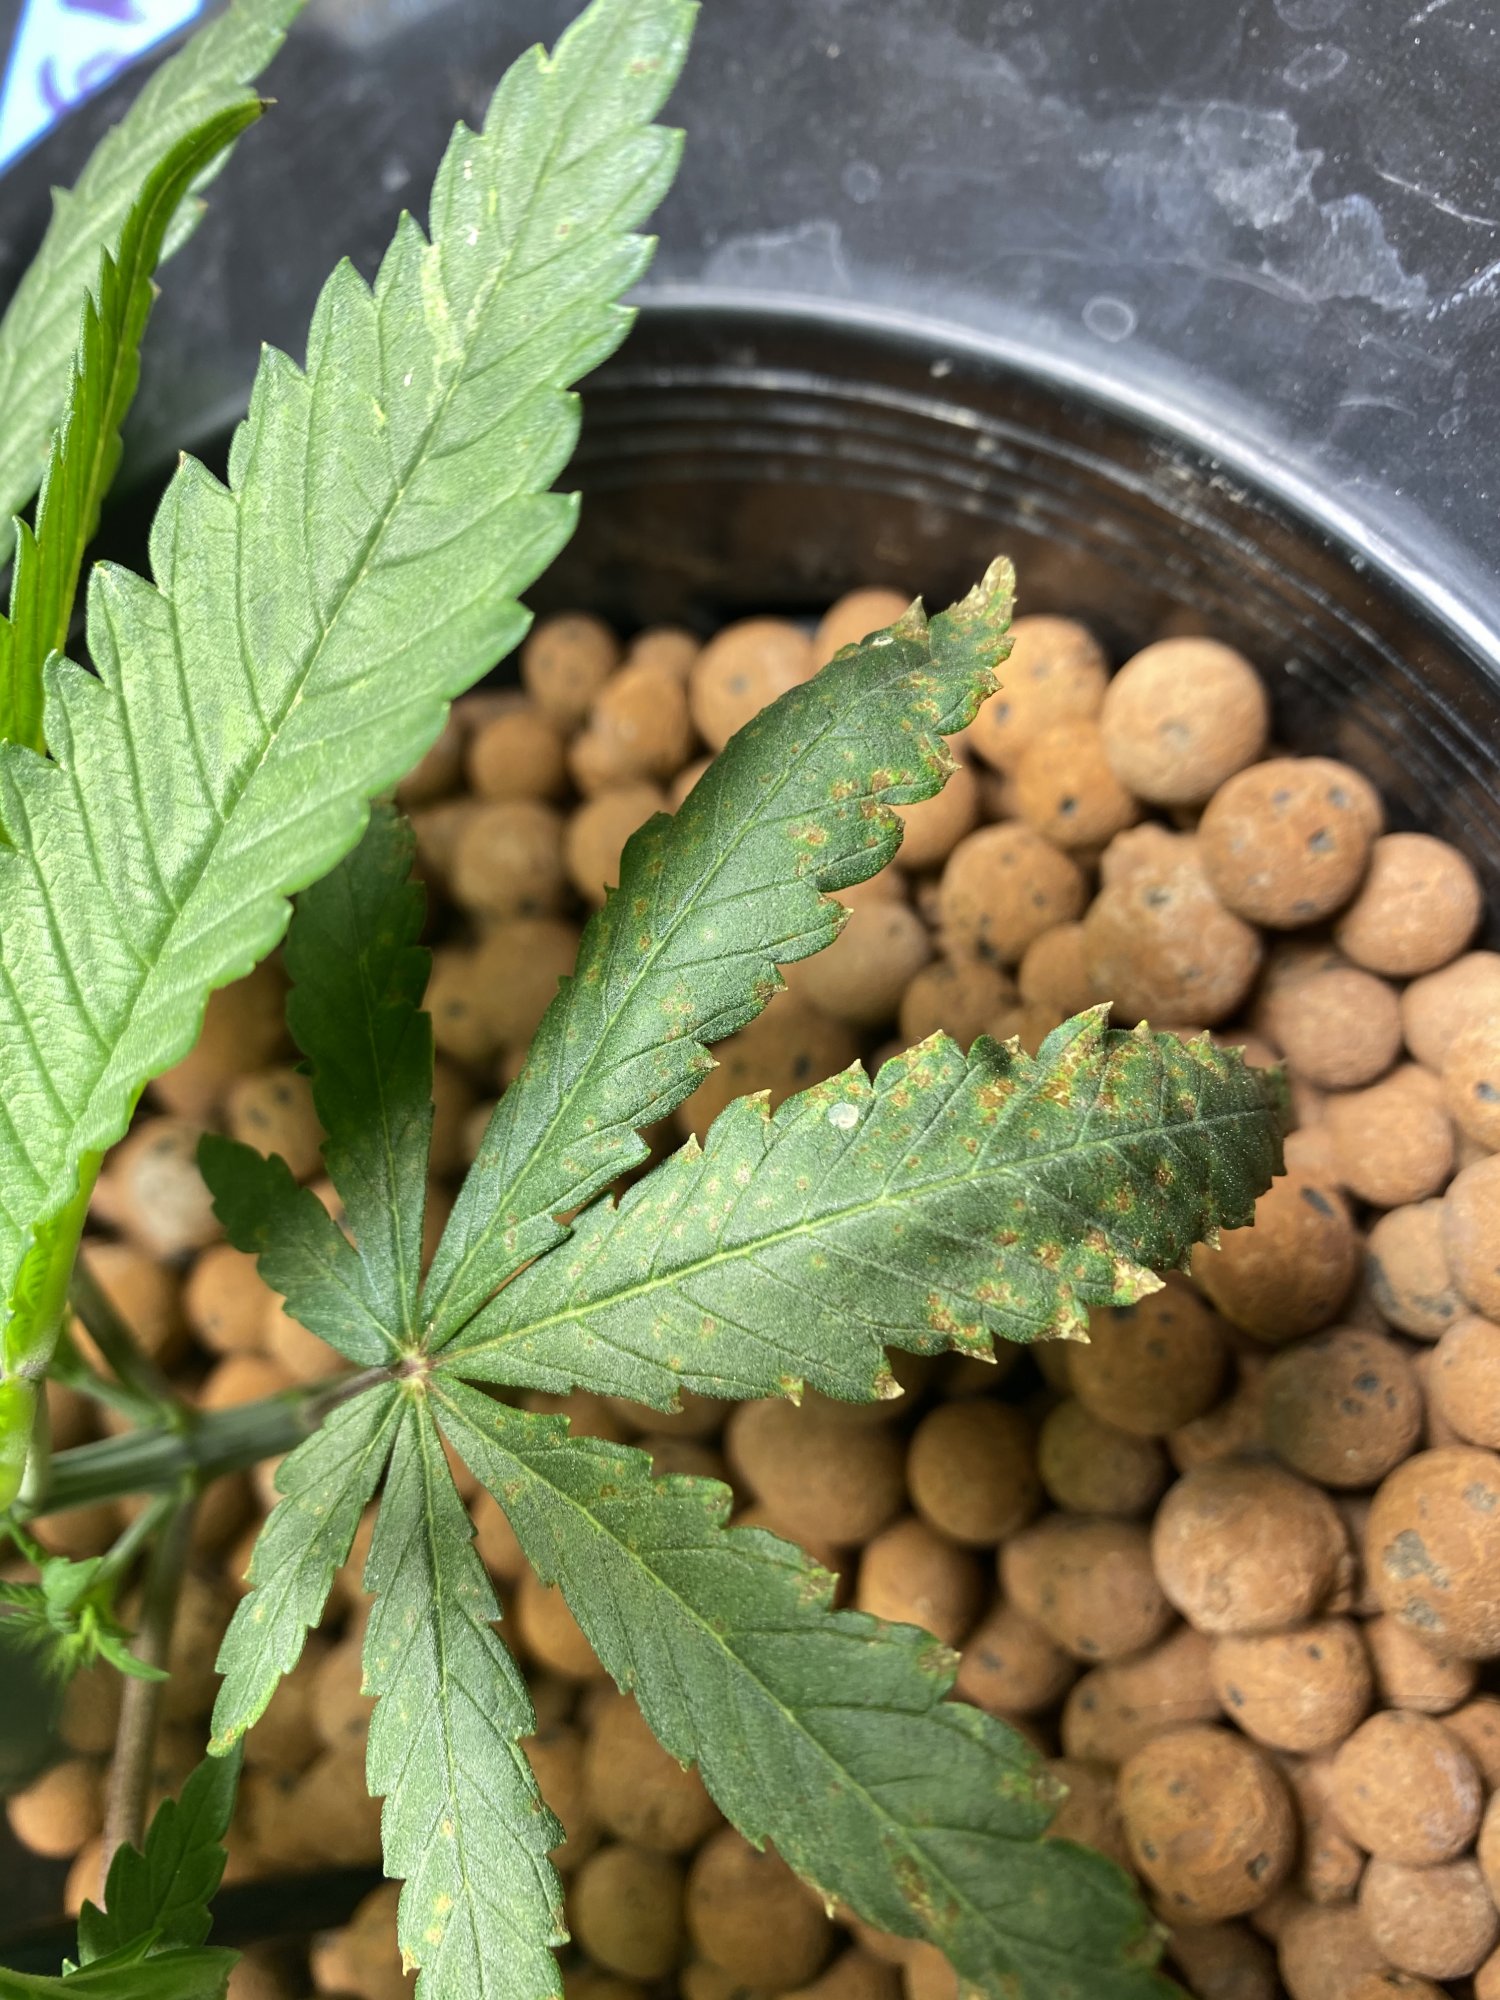 New grower with brown spots please help 3